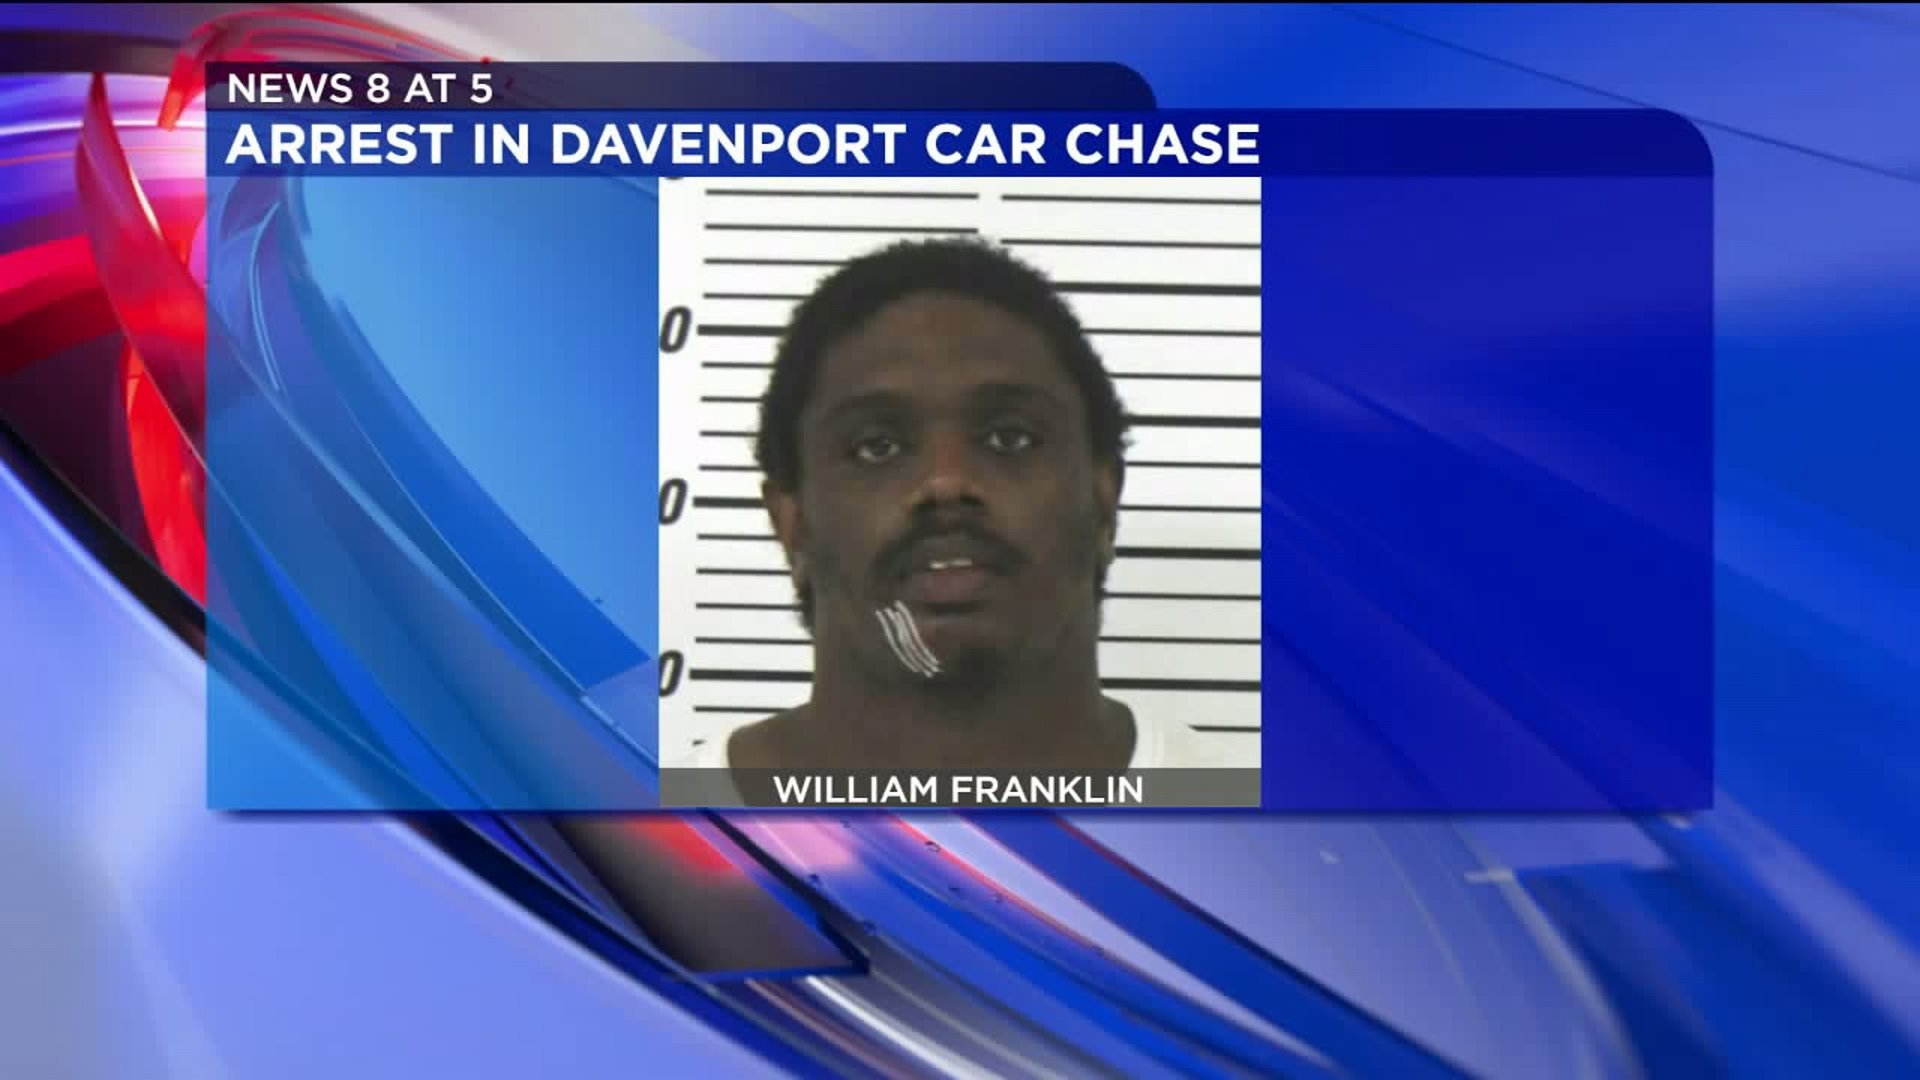 Rock Island man accused of leading police on chase through Davenport